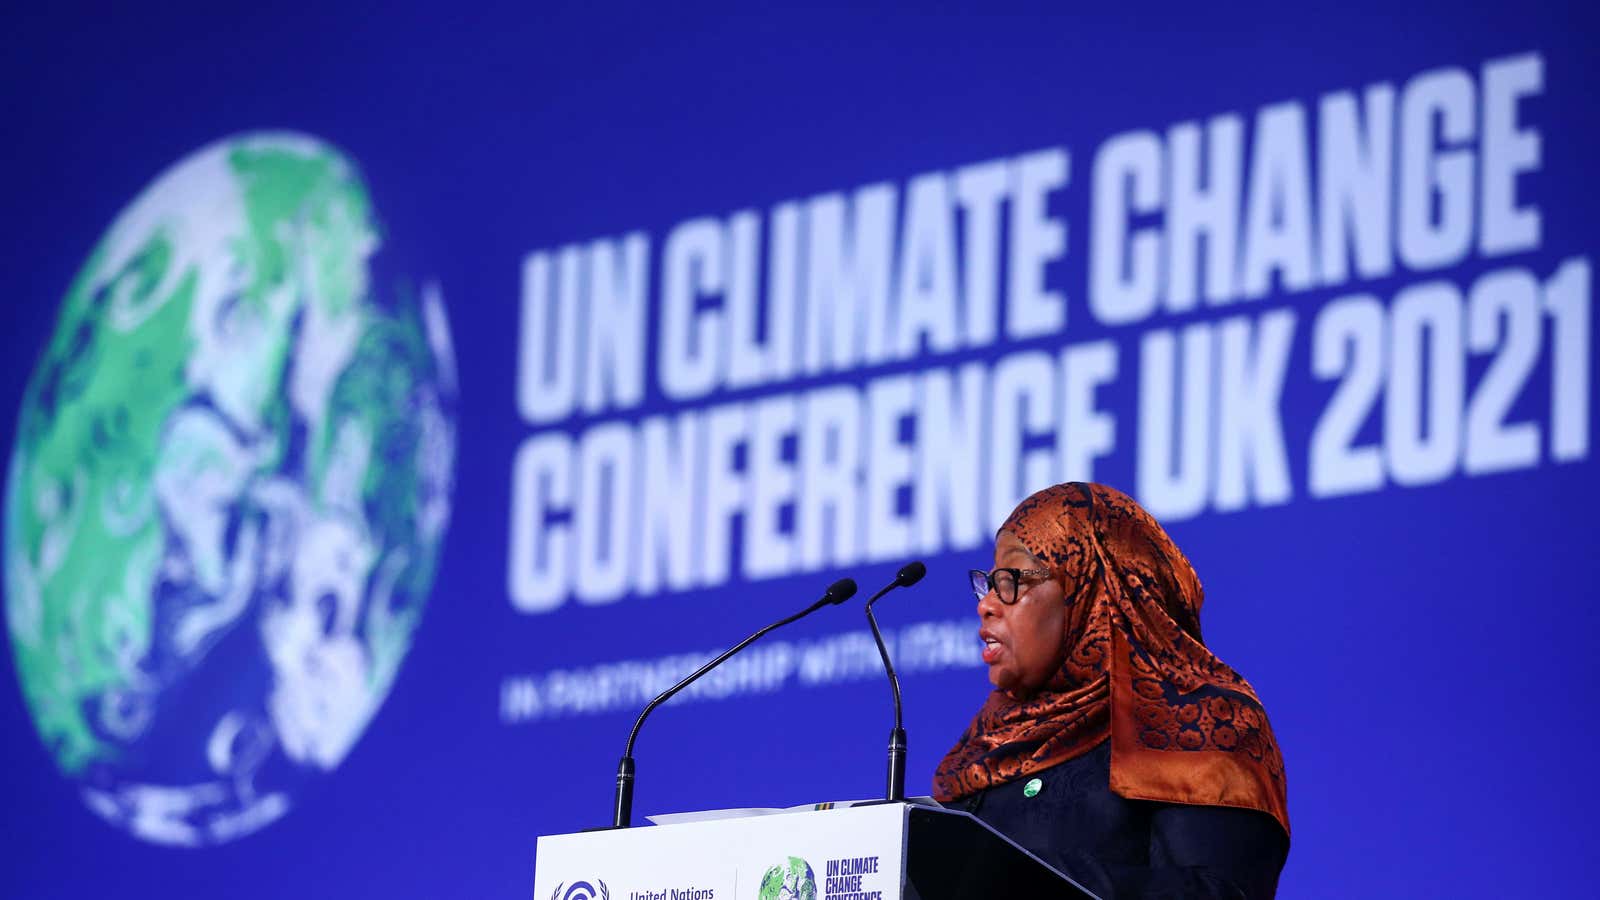 Samia Suluhu Hassan, President of Tanzania, speaks during the UN Climate Change Conference (COP26) in Glasgow, Scotland